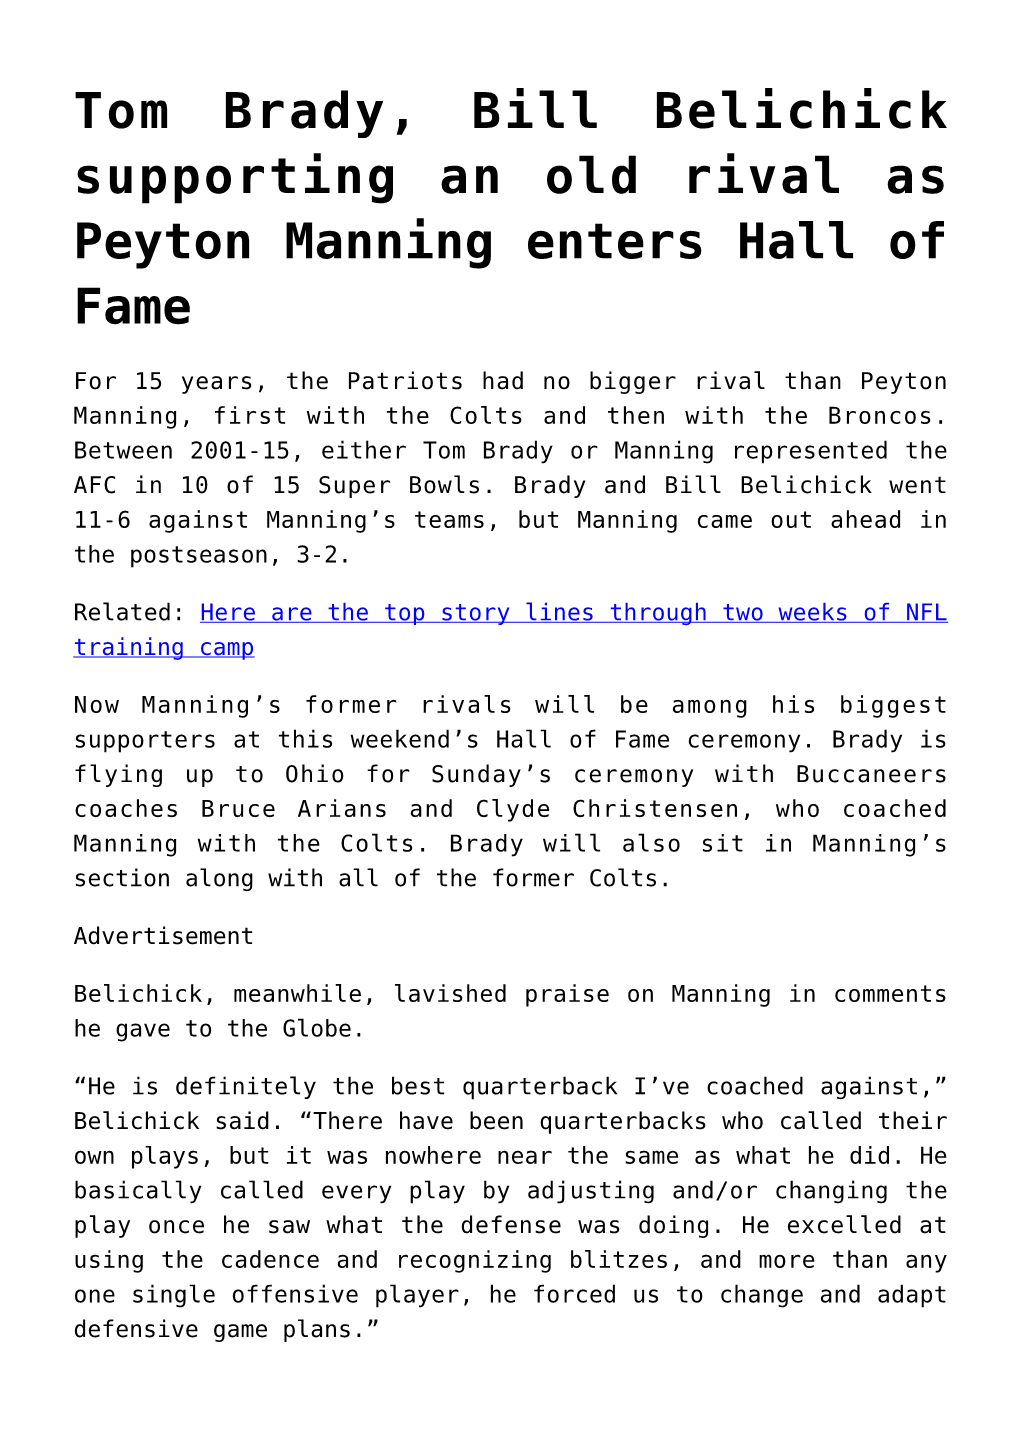 Tom Brady, Bill Belichick Supporting an Old Rival As Peyton Manning Enters Hall of Fame